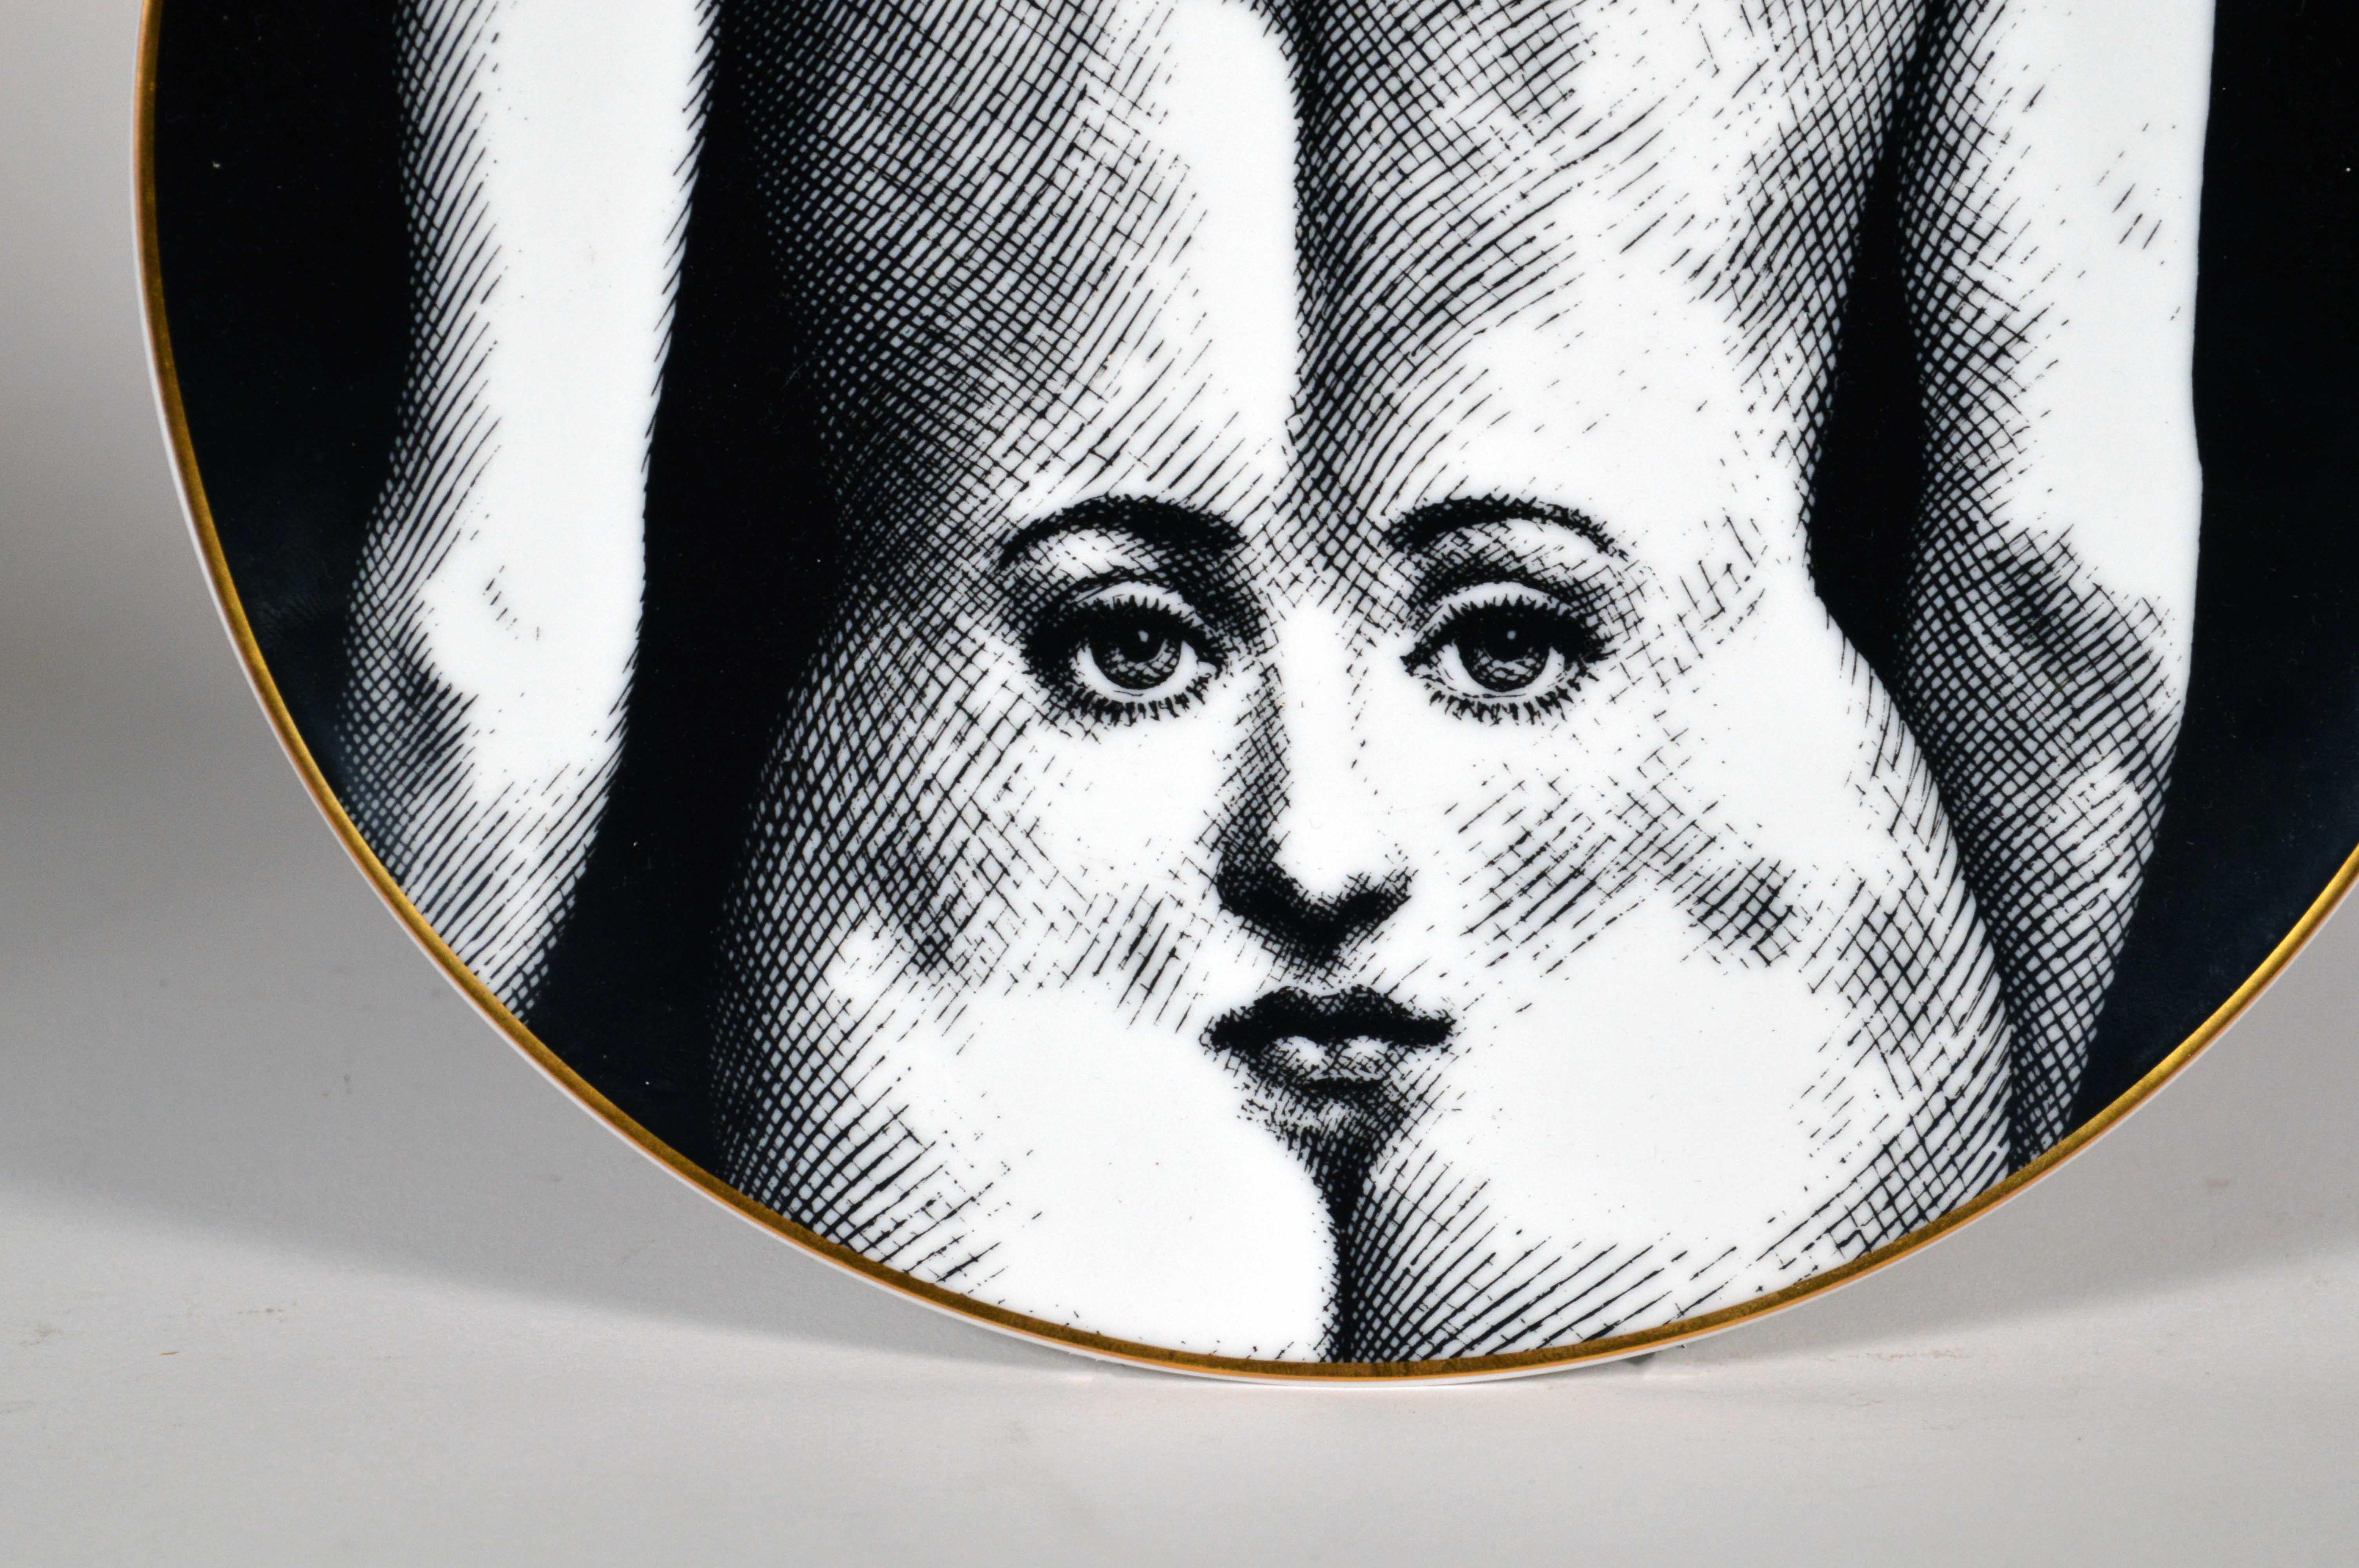 Piero Fornasetti Rosenthal plate, 
Motiv 28,
Depicting the Face of Julia an a Woman's Back,
1980s


The striking Rosenthal Fornasetti gold-rimmed black and white printed plate with the face of Lina Cavalieri depicted on the back of a